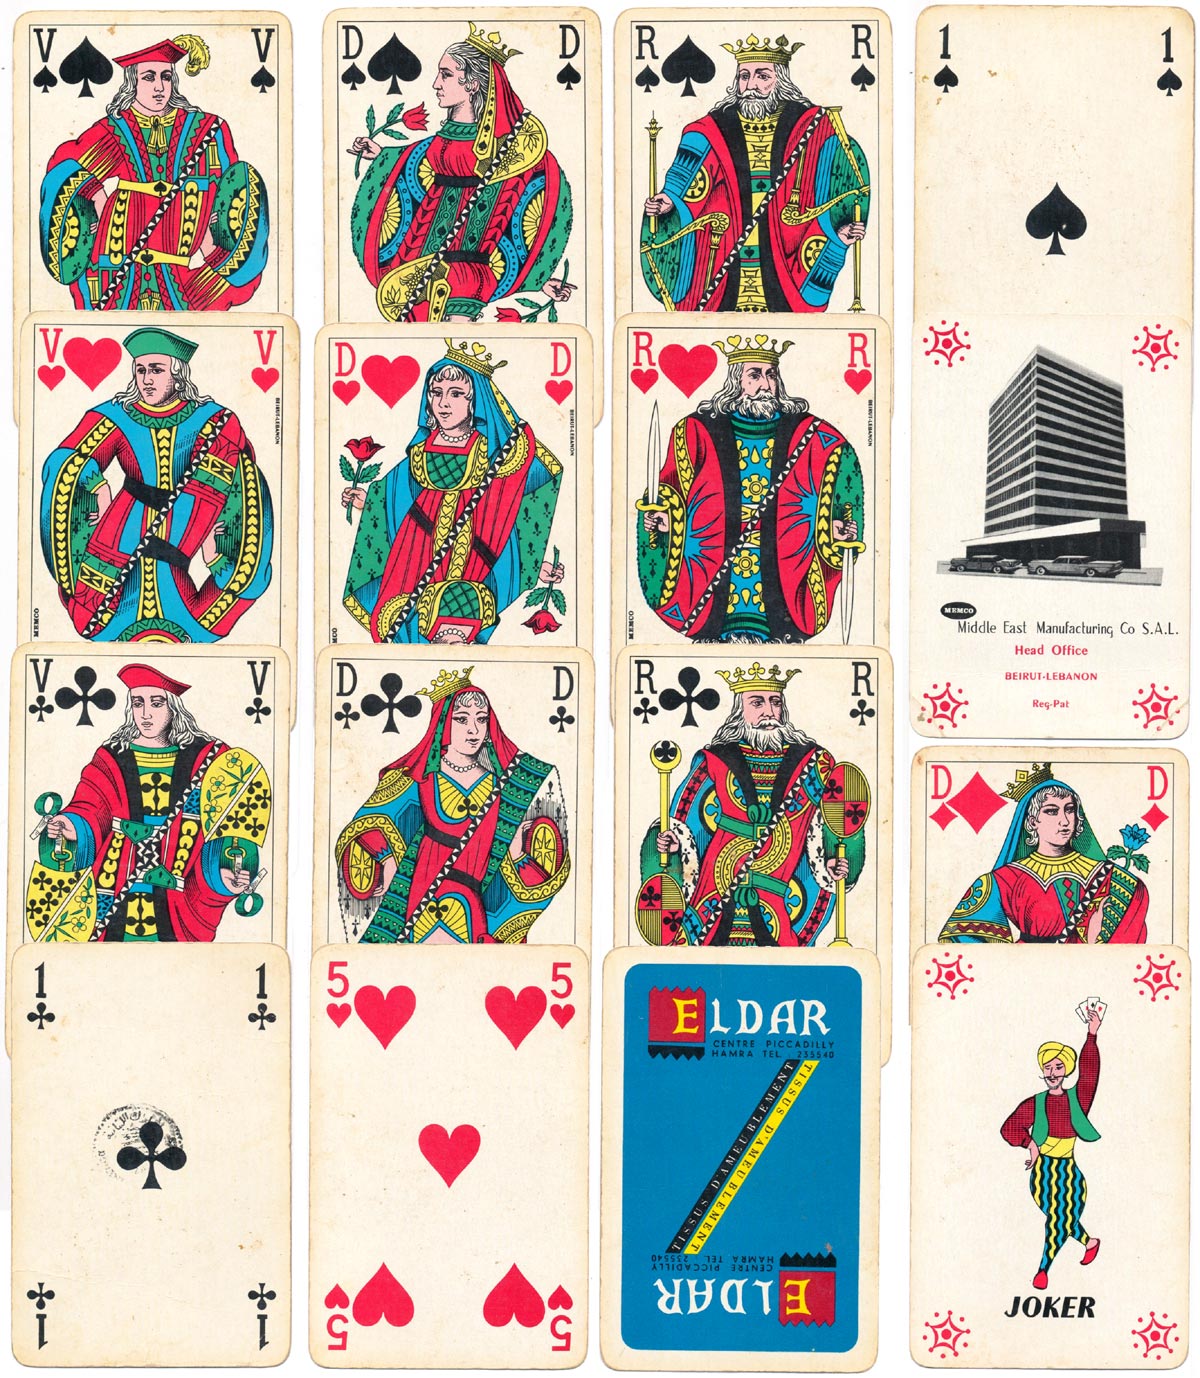 Eldar advertising deck by Middle East Manufacturing Co of Beirut, Lebanon, c.1960